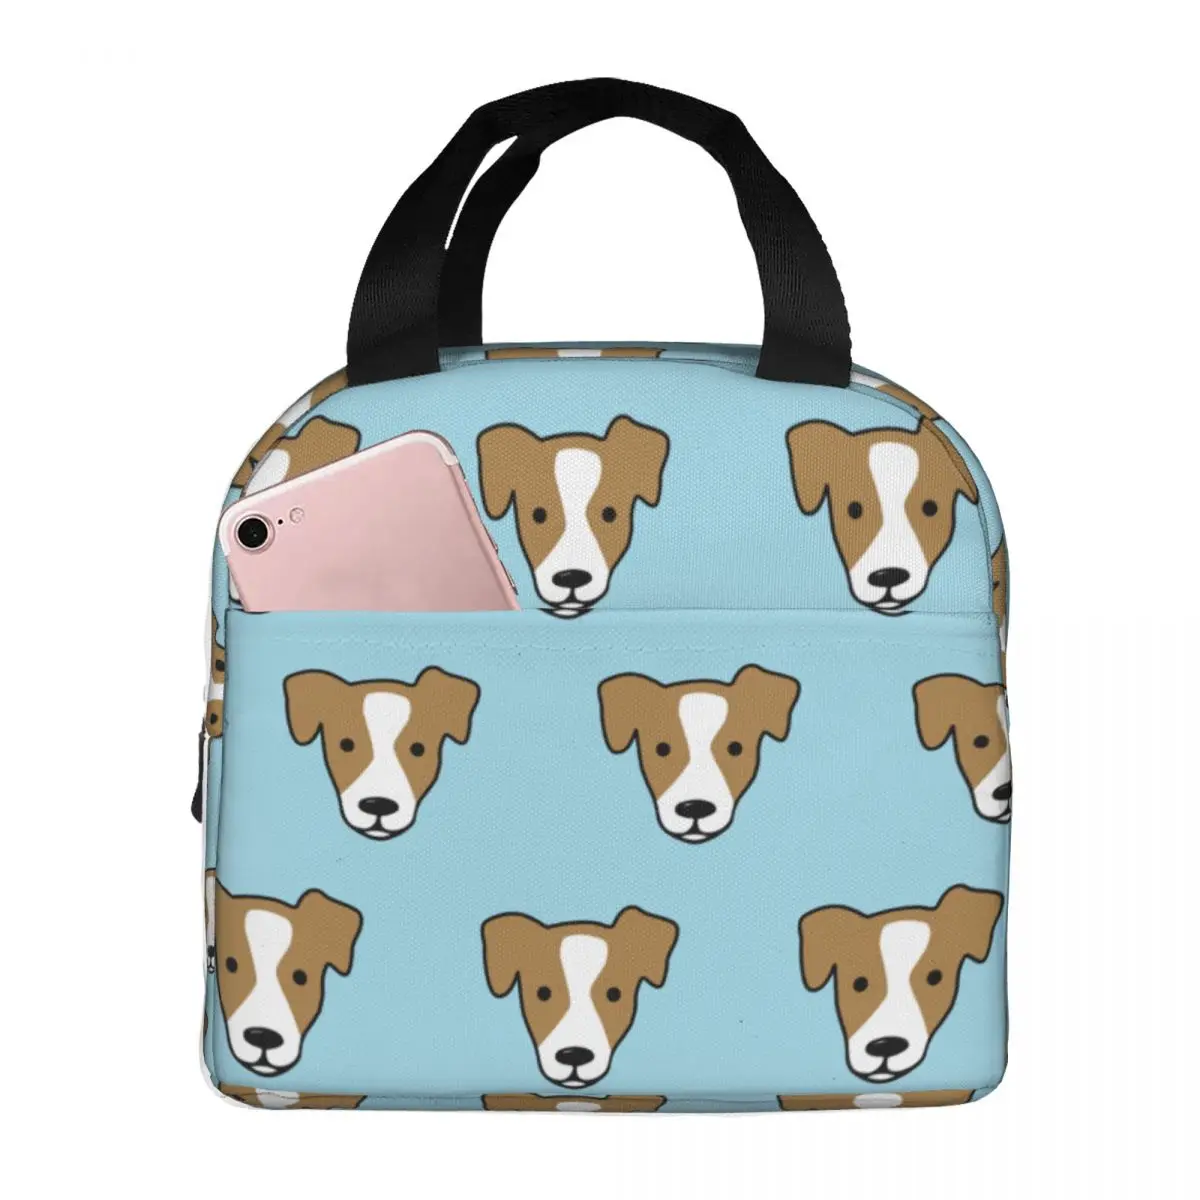 Cute Dog Lunch Bag Waterproof Insulated Canvas Cooler Bag Thermal Food Picnic Tote for Women Children